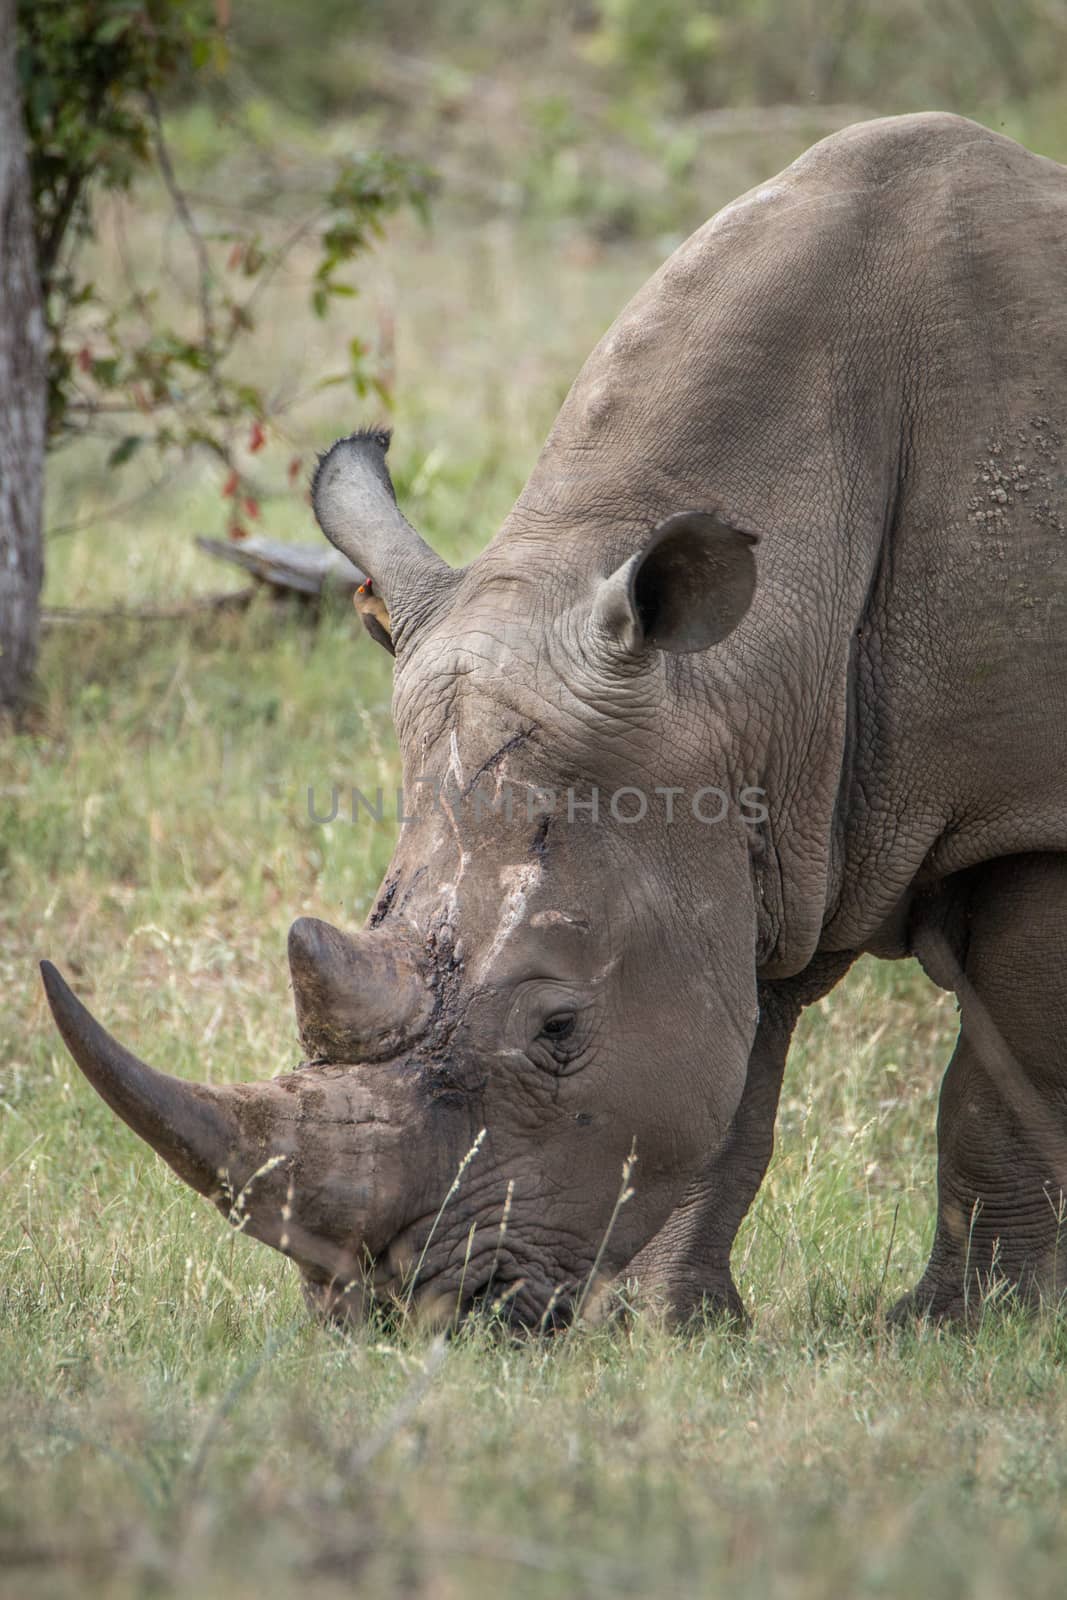 Grazing White rhino in the Kruger National Park, South Africa.